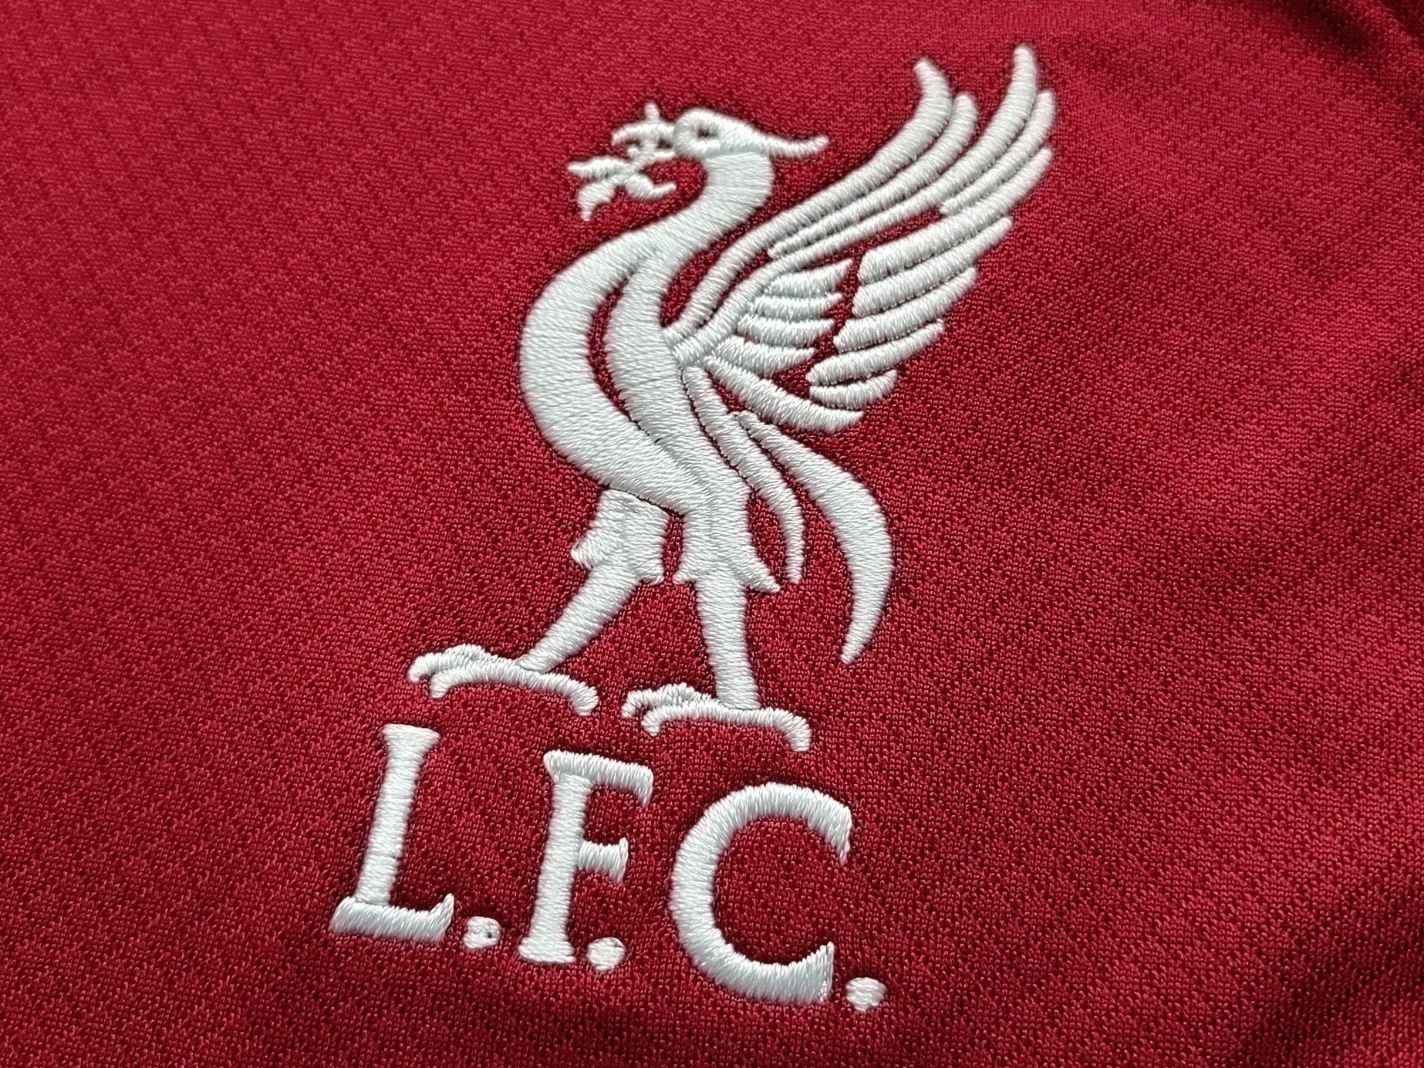 Liverpool home kit for 22/23 season with retro collar design leaks online